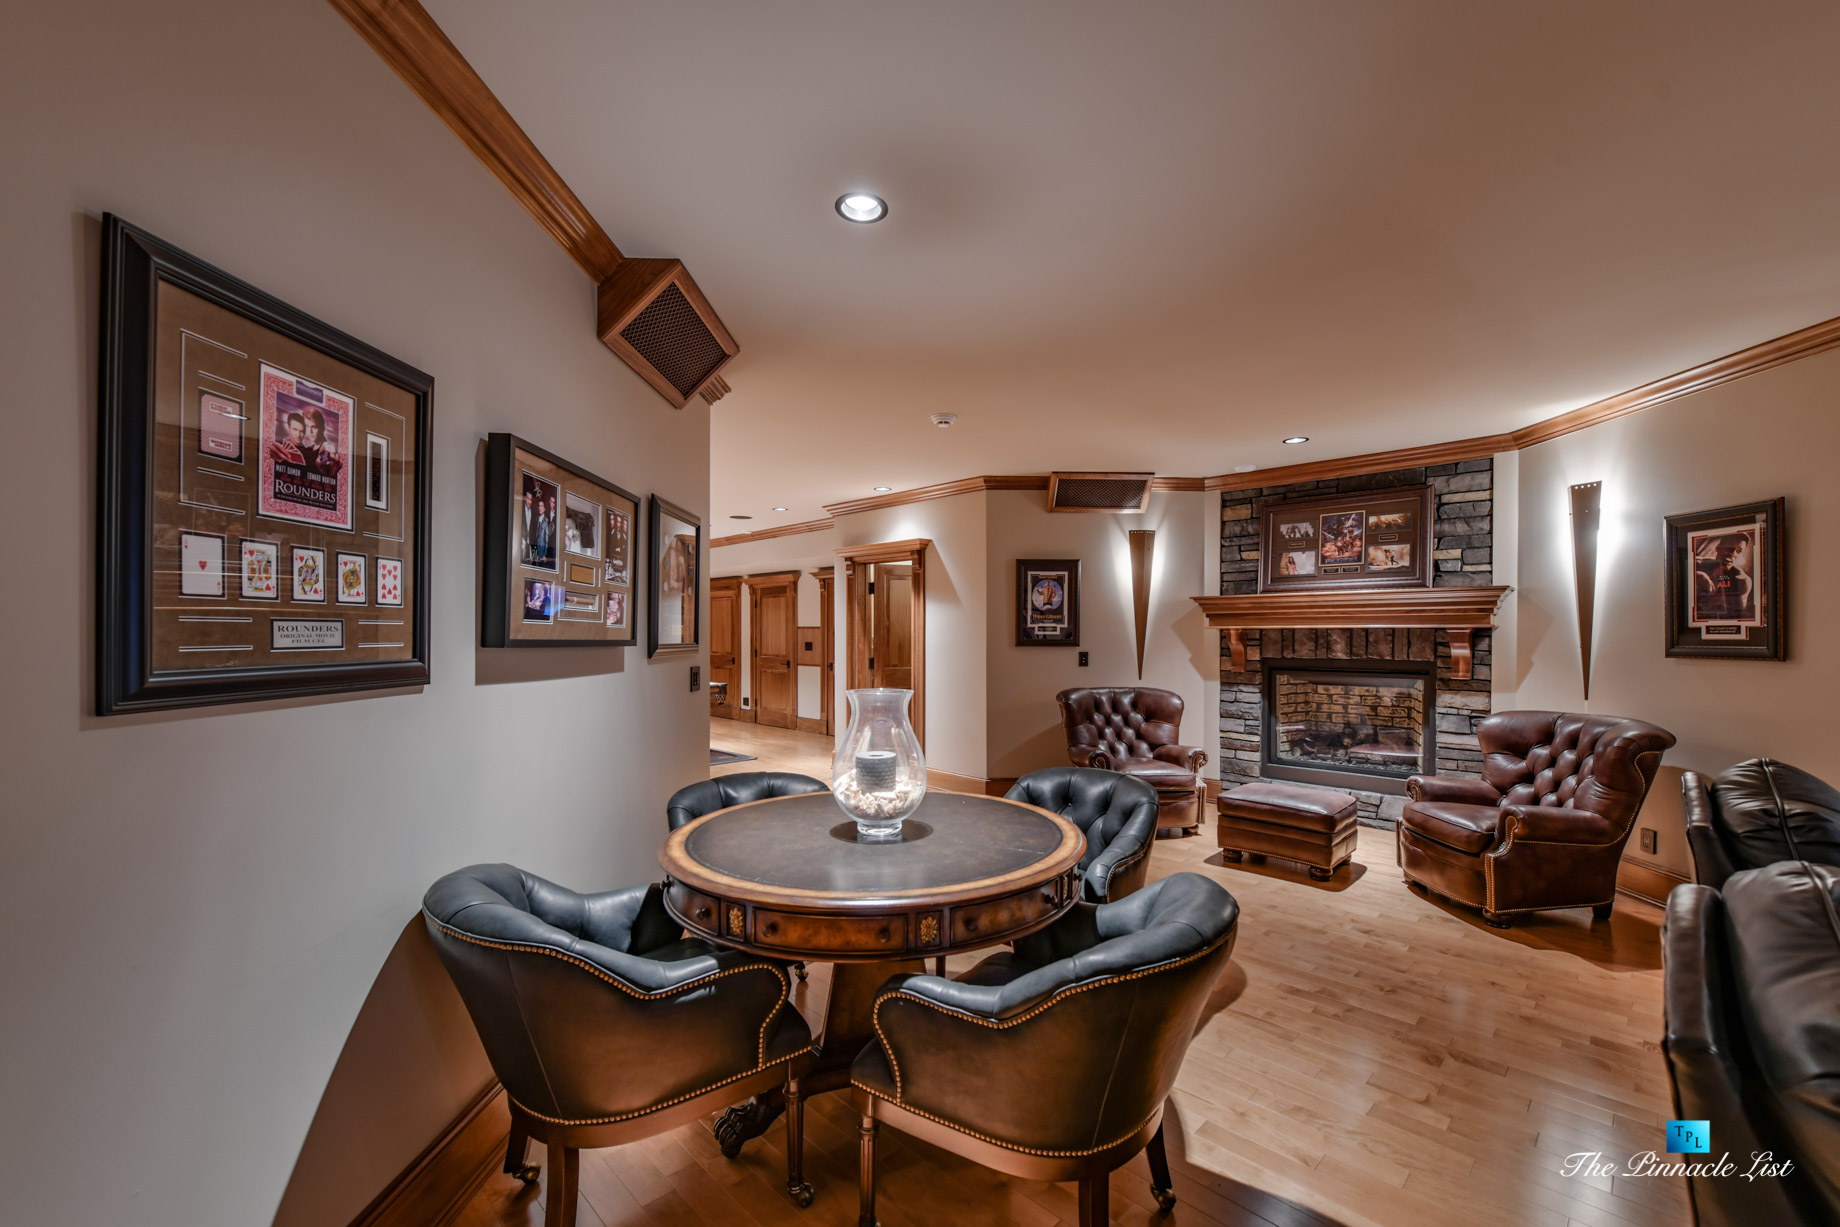 3053 Anmore Creek Way, Anmore, BC, Canada – Basement Man Cave Poker Table Fireplace and Lounge Chairs – Luxury Real Estate – Greater Vancouver Home